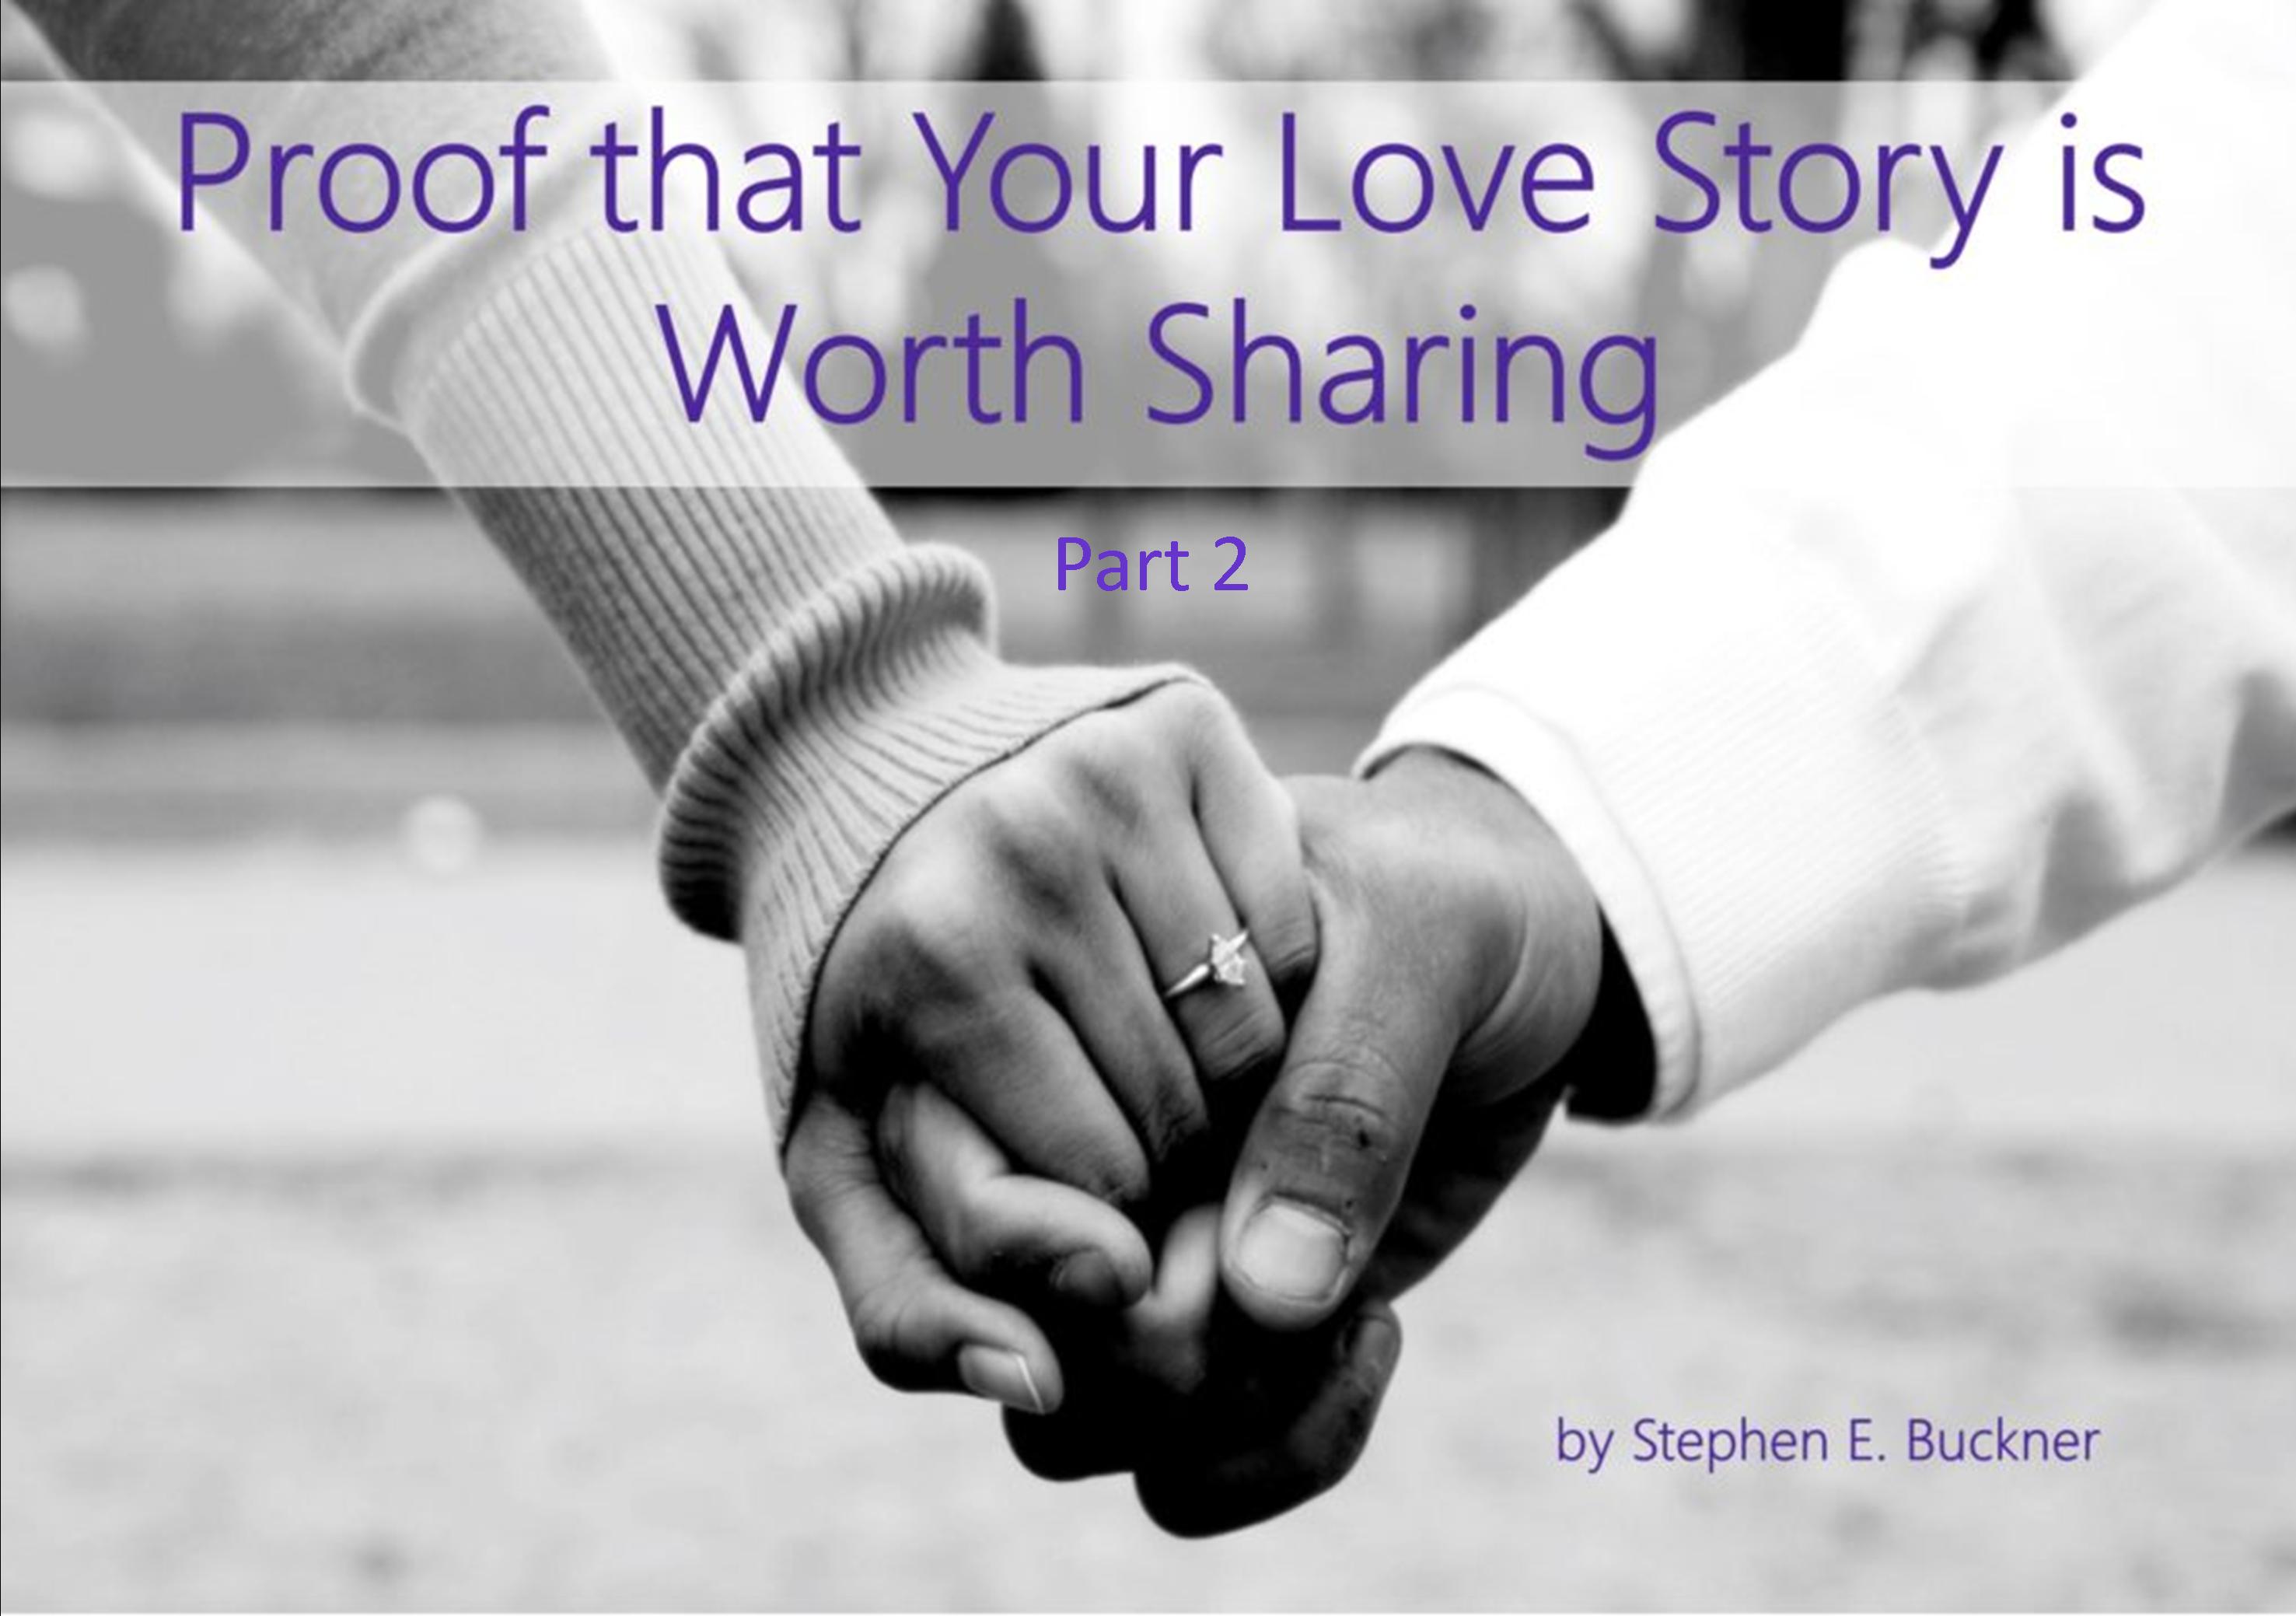 Proof that Your Love Story is Worth Sharing, Part 2 - HotMarriage.org